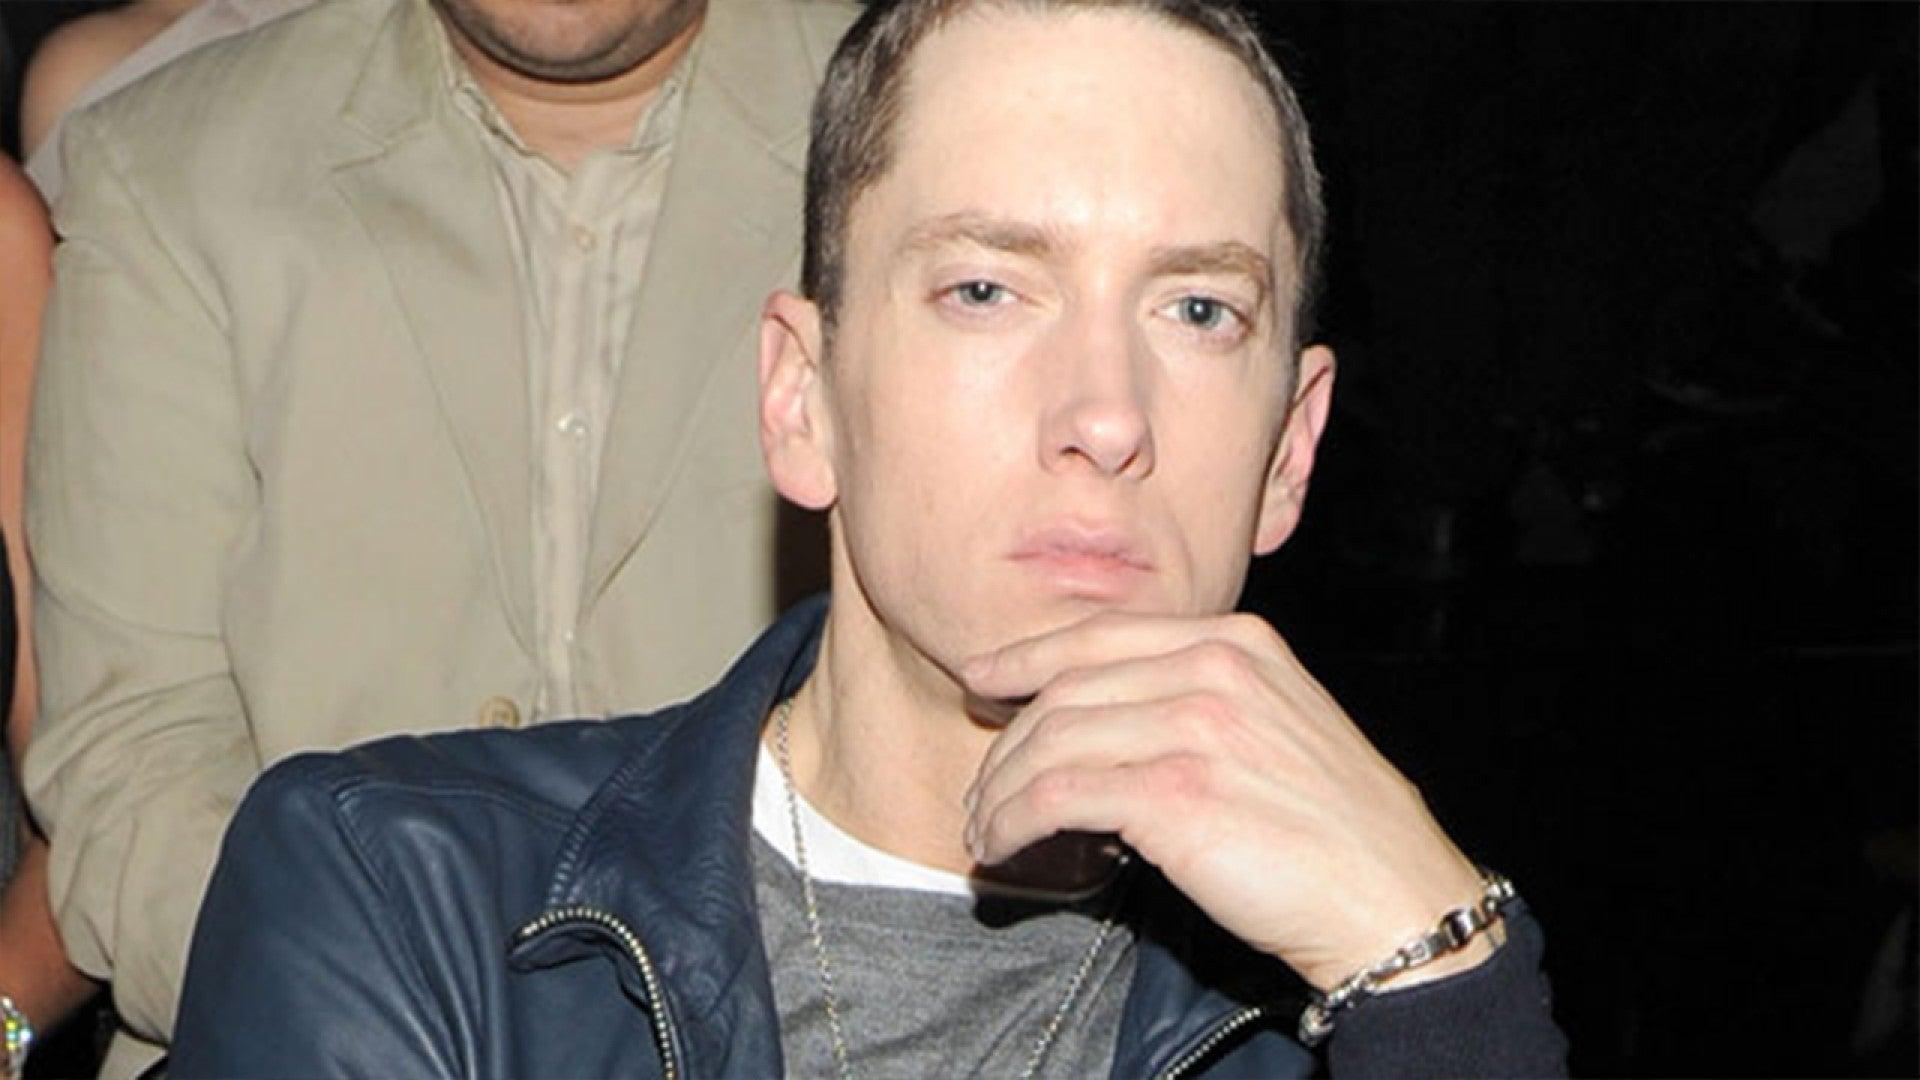 Eminem Has a Beard and Brown Hair Now and the Internet Can't